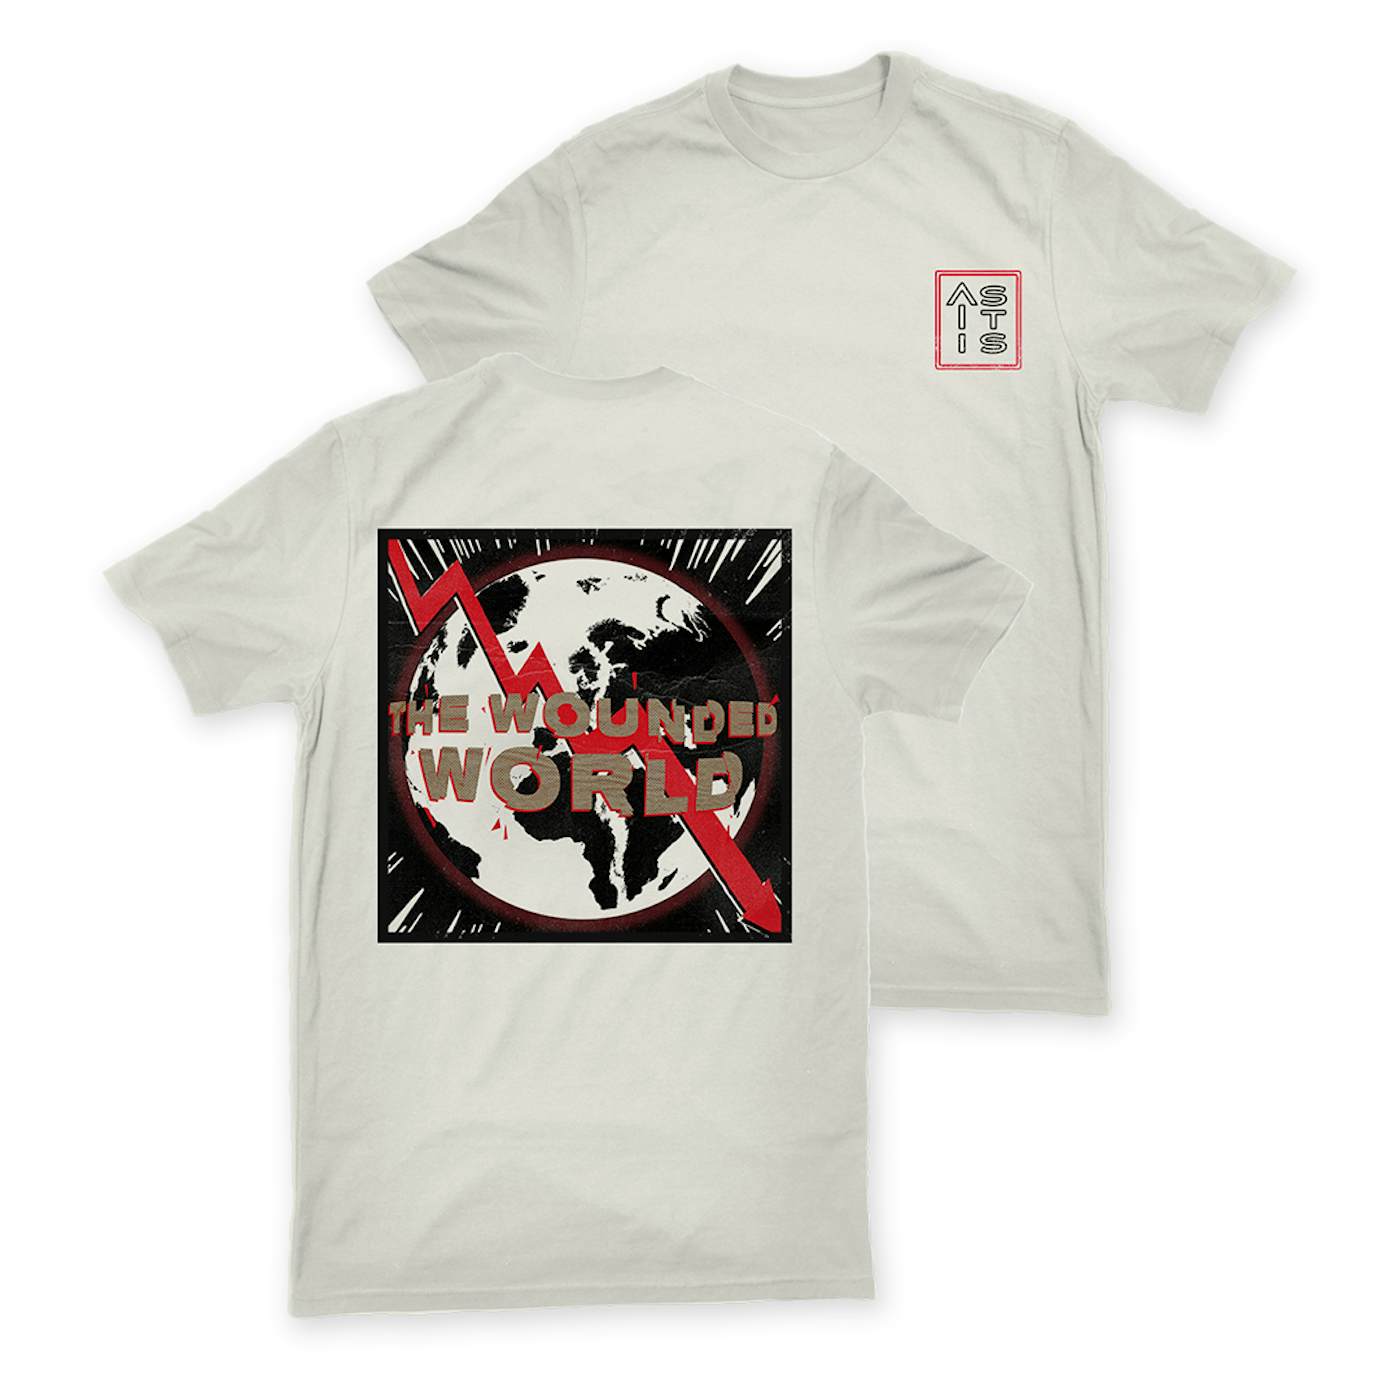 AS IT IS The Wounded World Tee - White